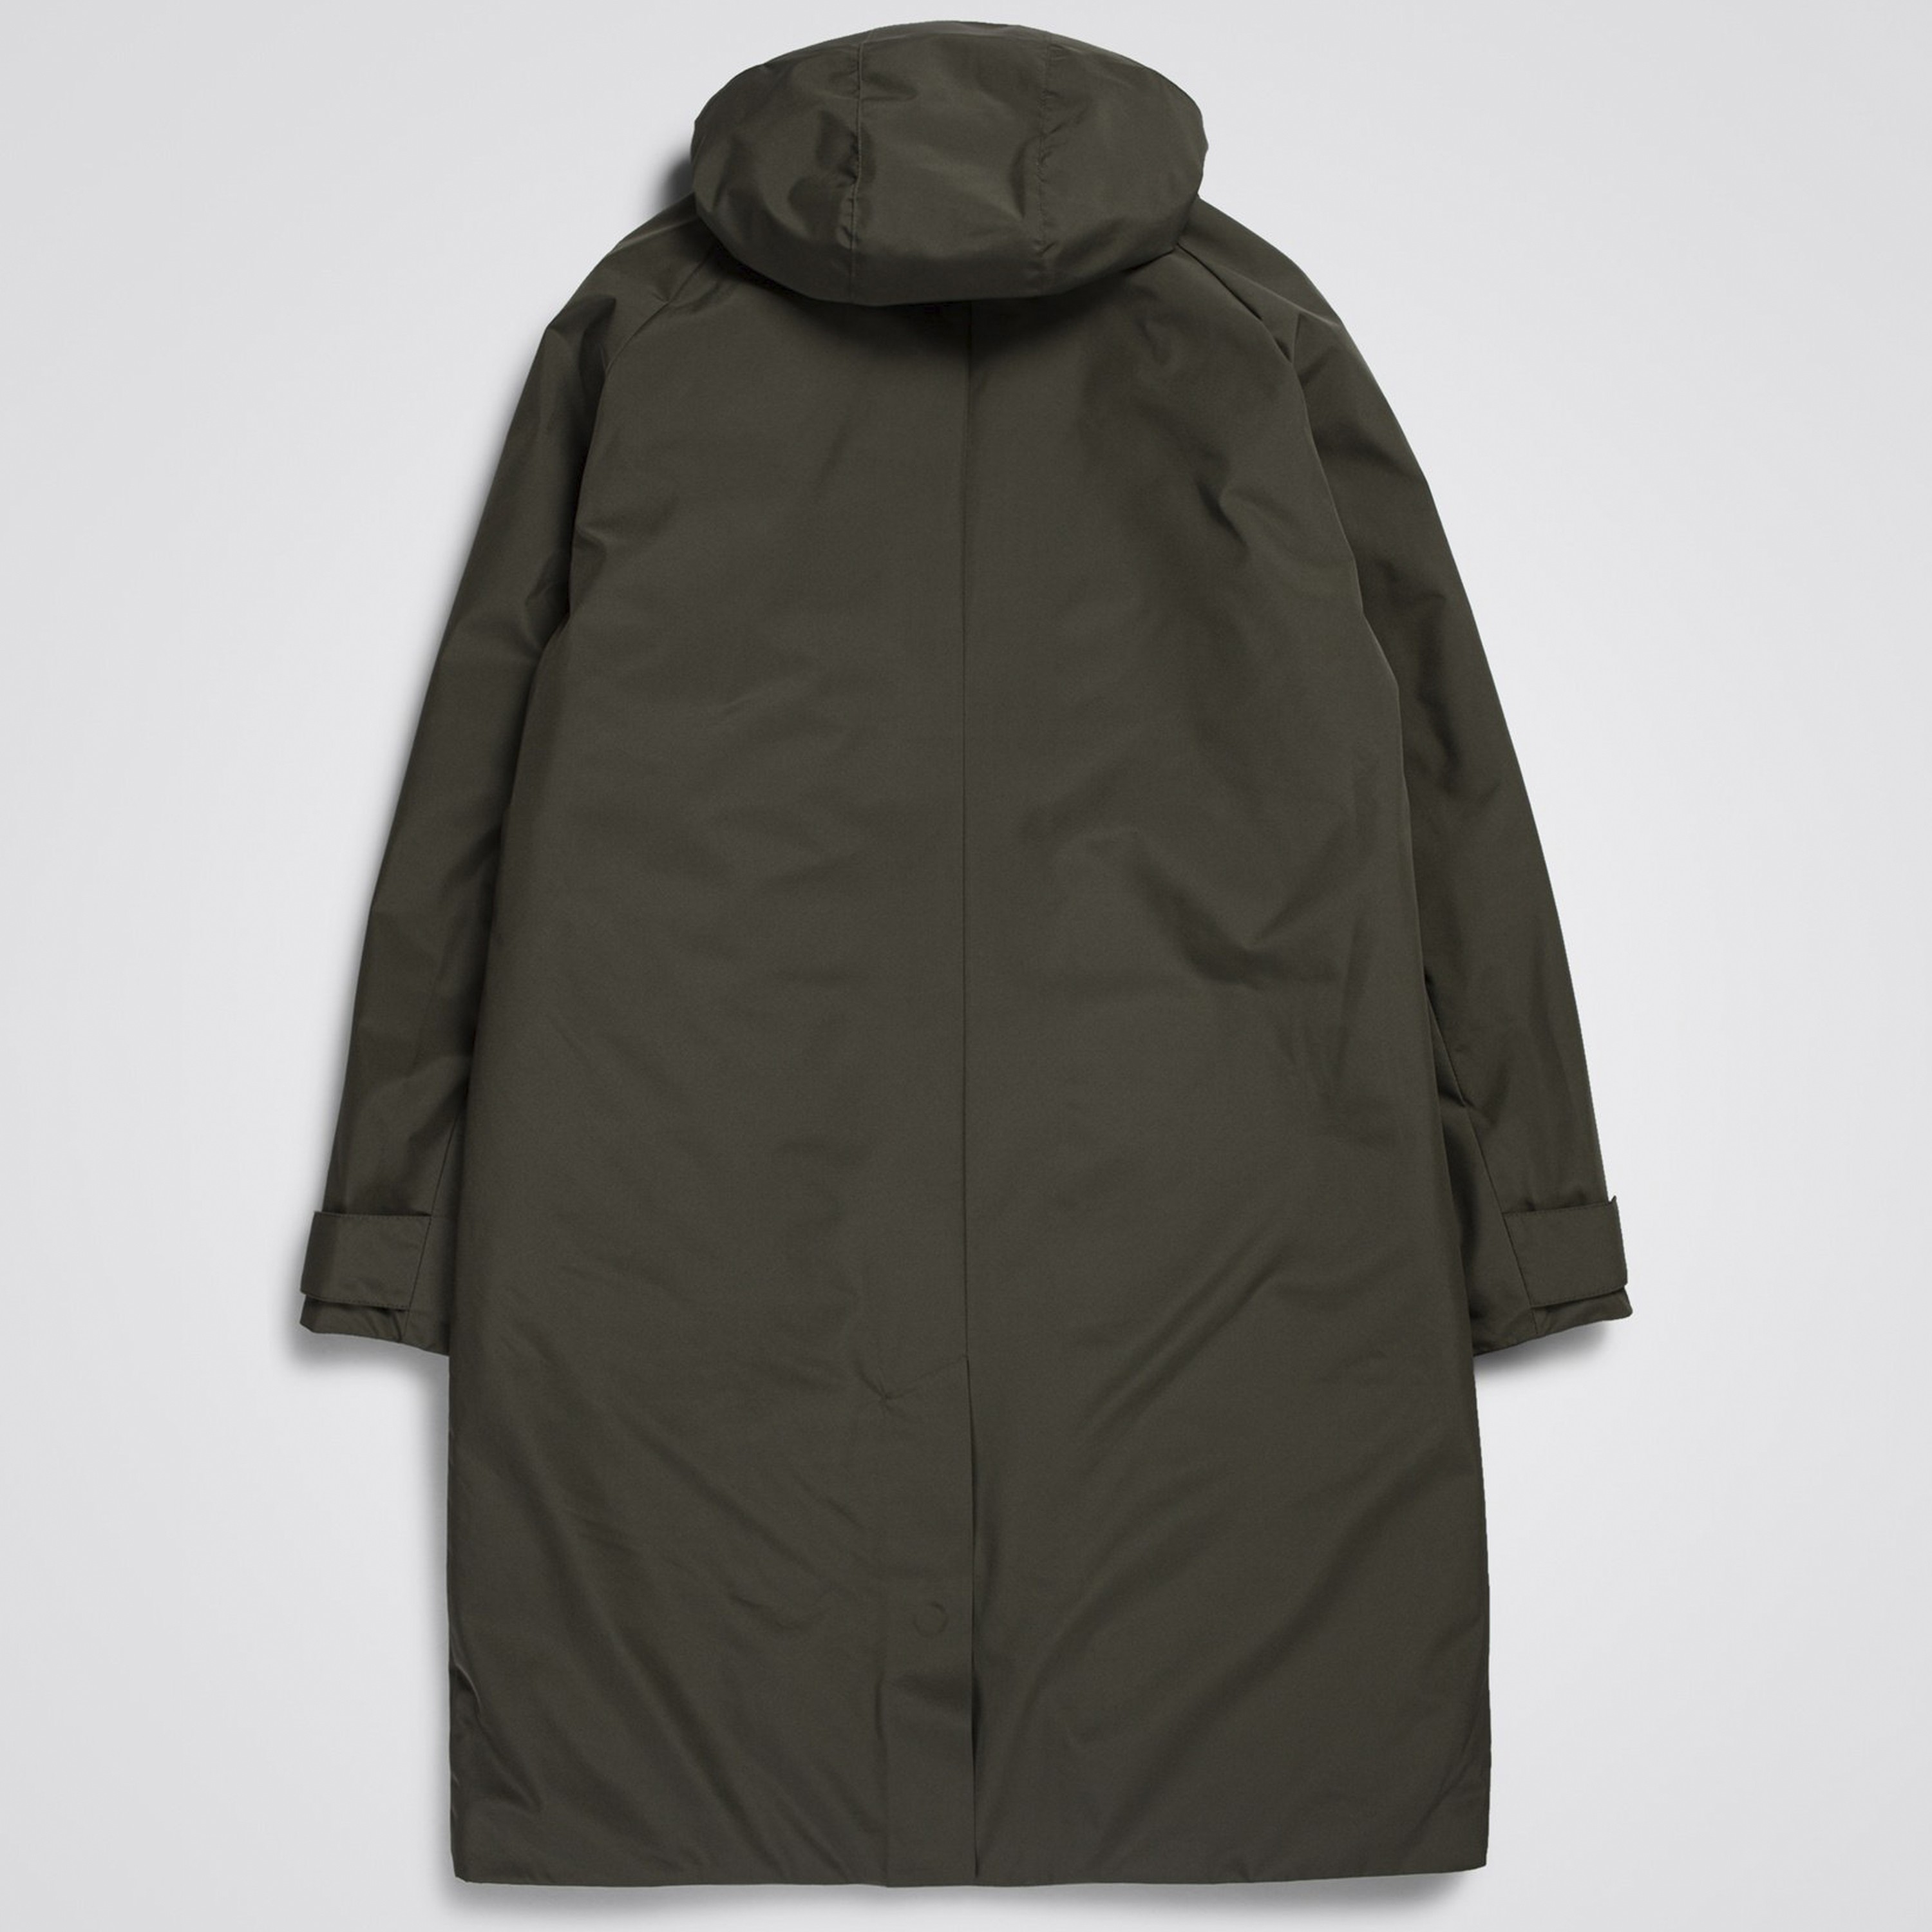 Norse Projects Thor GORE-TEX Infinium 2.0 Jacket (Ivy Green) - N55-0551